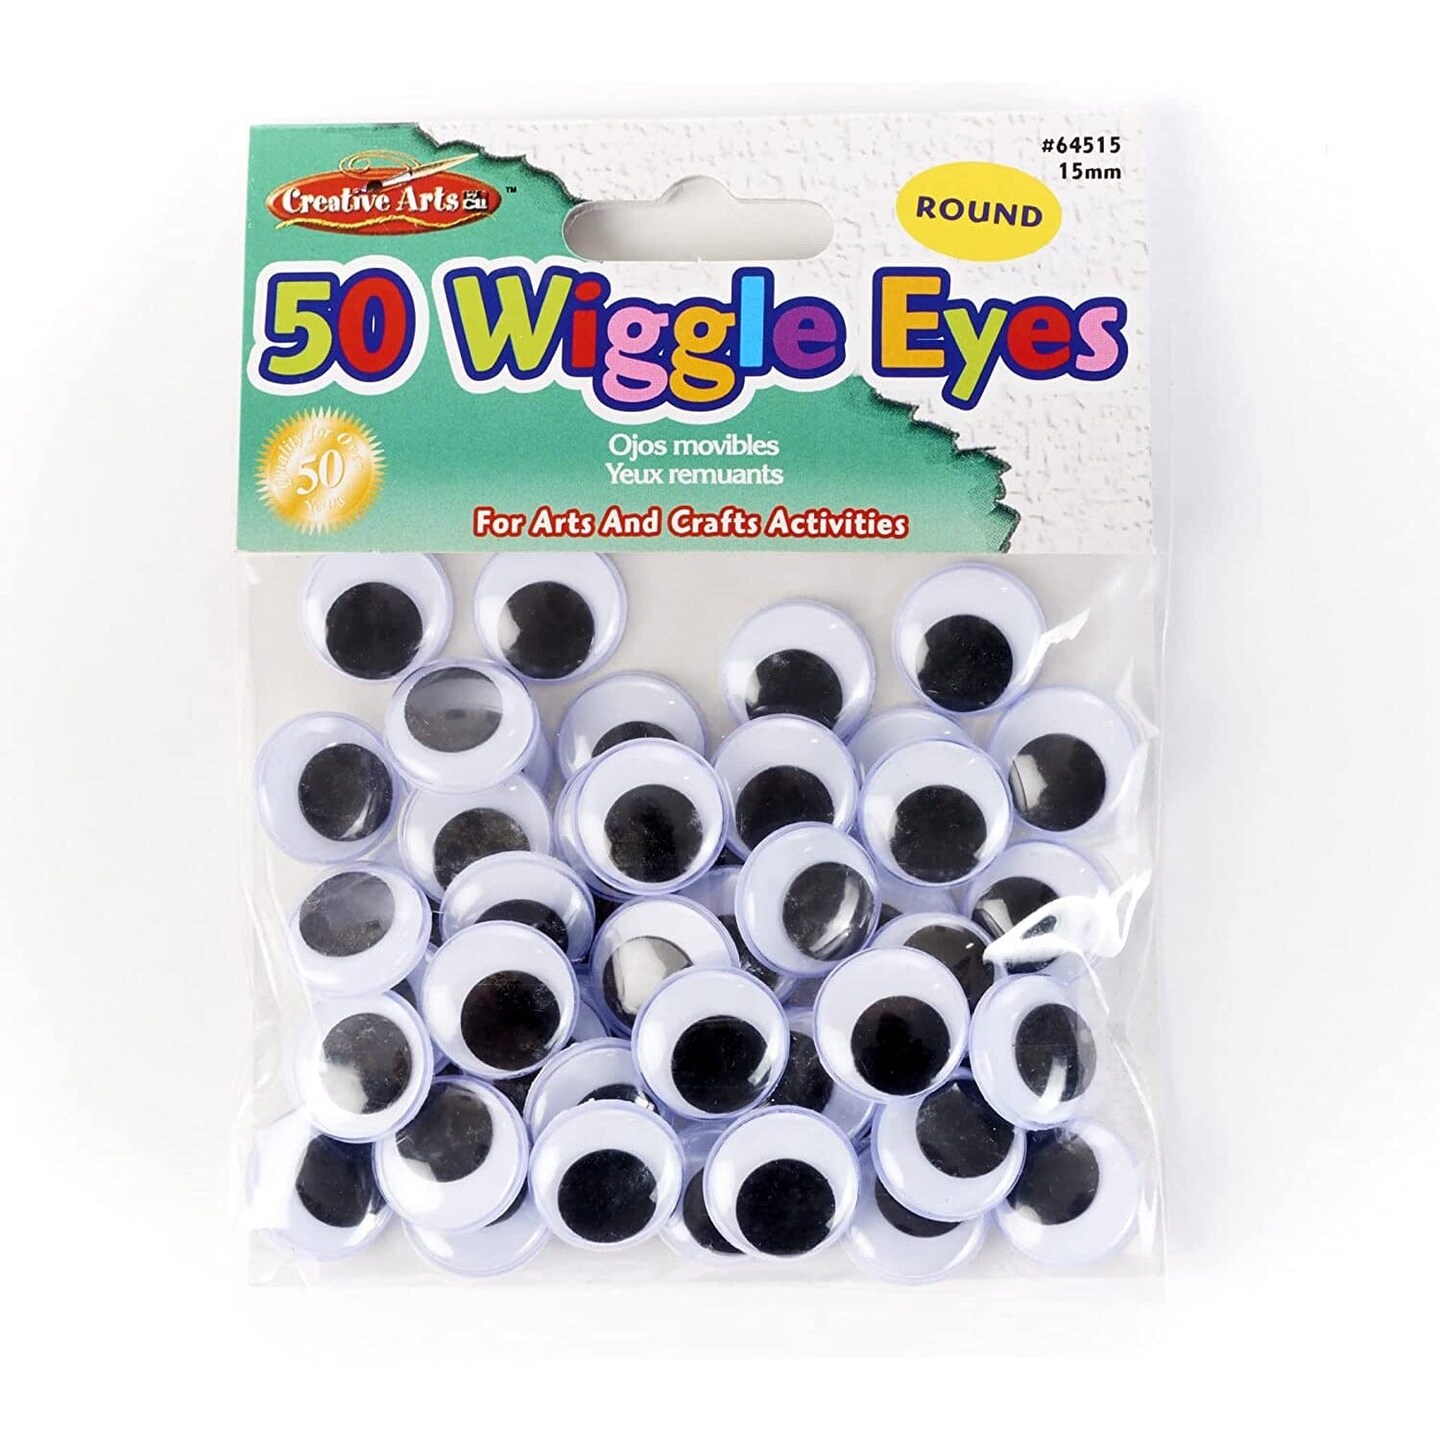 Mini Wiggle Eyes Black Small Plastic Round Moving Googly Eyes for Children  School Classroom Arts & Crafts Models (500 Eyes)